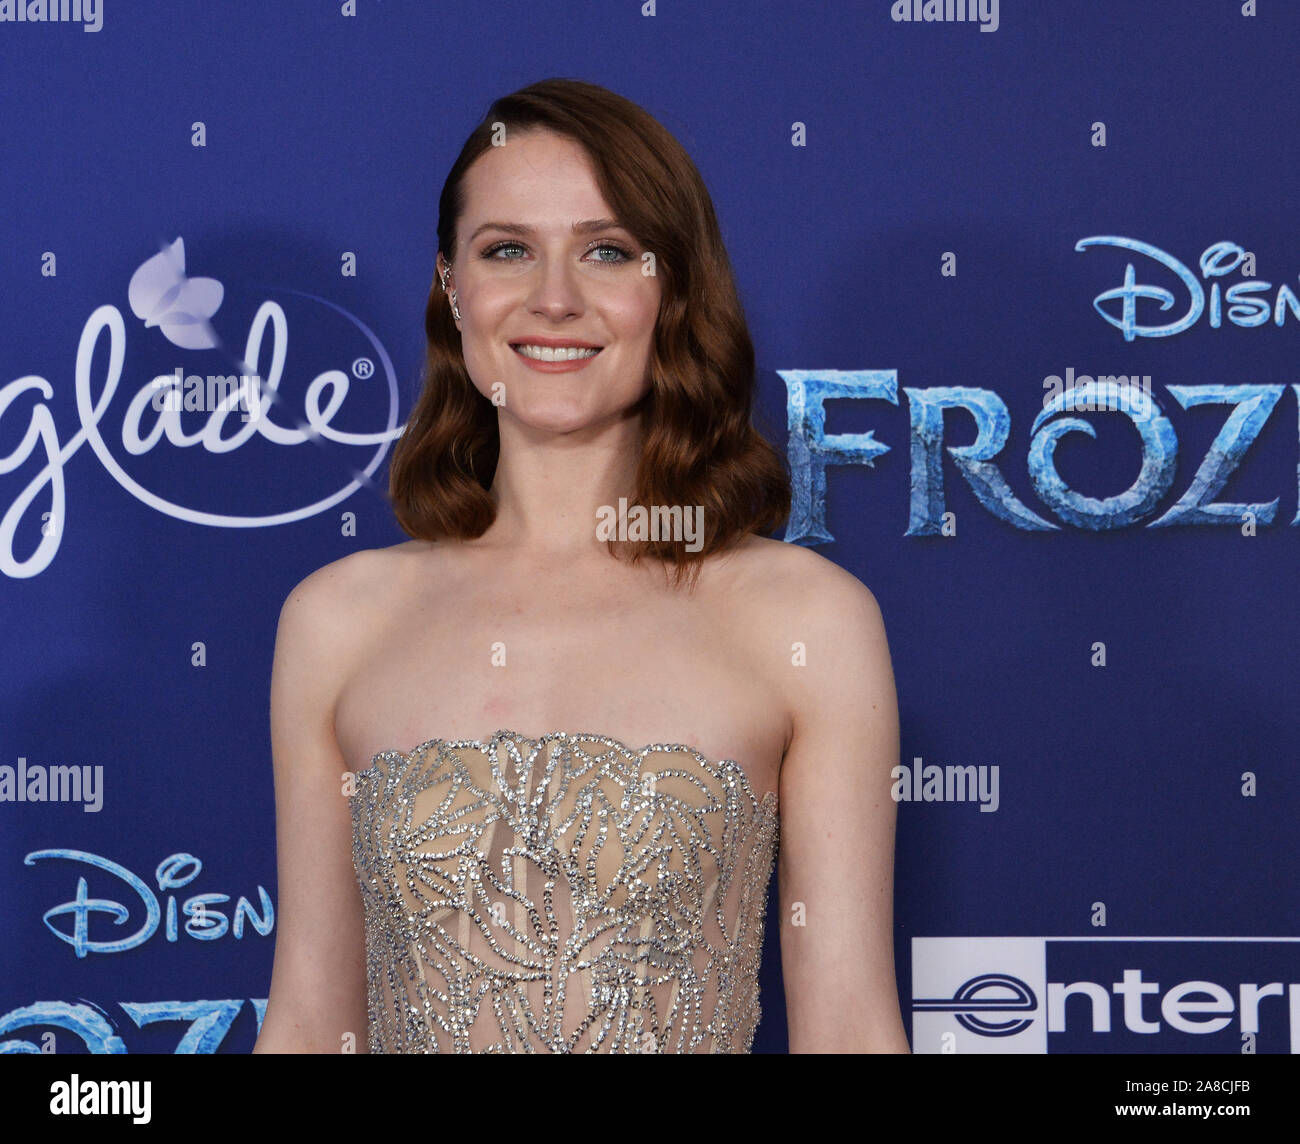 Los Angeles, United States. 07th Nov, 2019. Cast member Evan Rachel Wood attends the premiere of the animated musical comedy 'Frozen II' premiere at the Dolby Theatre in the Hollywood section of Los Angeles on Thursday, November 7, 2019. Storyline: Anna, Elsa, Kristoff, Olaf and Sven leave Arendelle to travel to an ancient, autumn-bound forest of an enchanted land. They set out to find the origin of Elsa's powers in order to save their kingdom. Photo by Jim Ruymen/UPI Credit: UPI/Alamy Live News Stock Photo